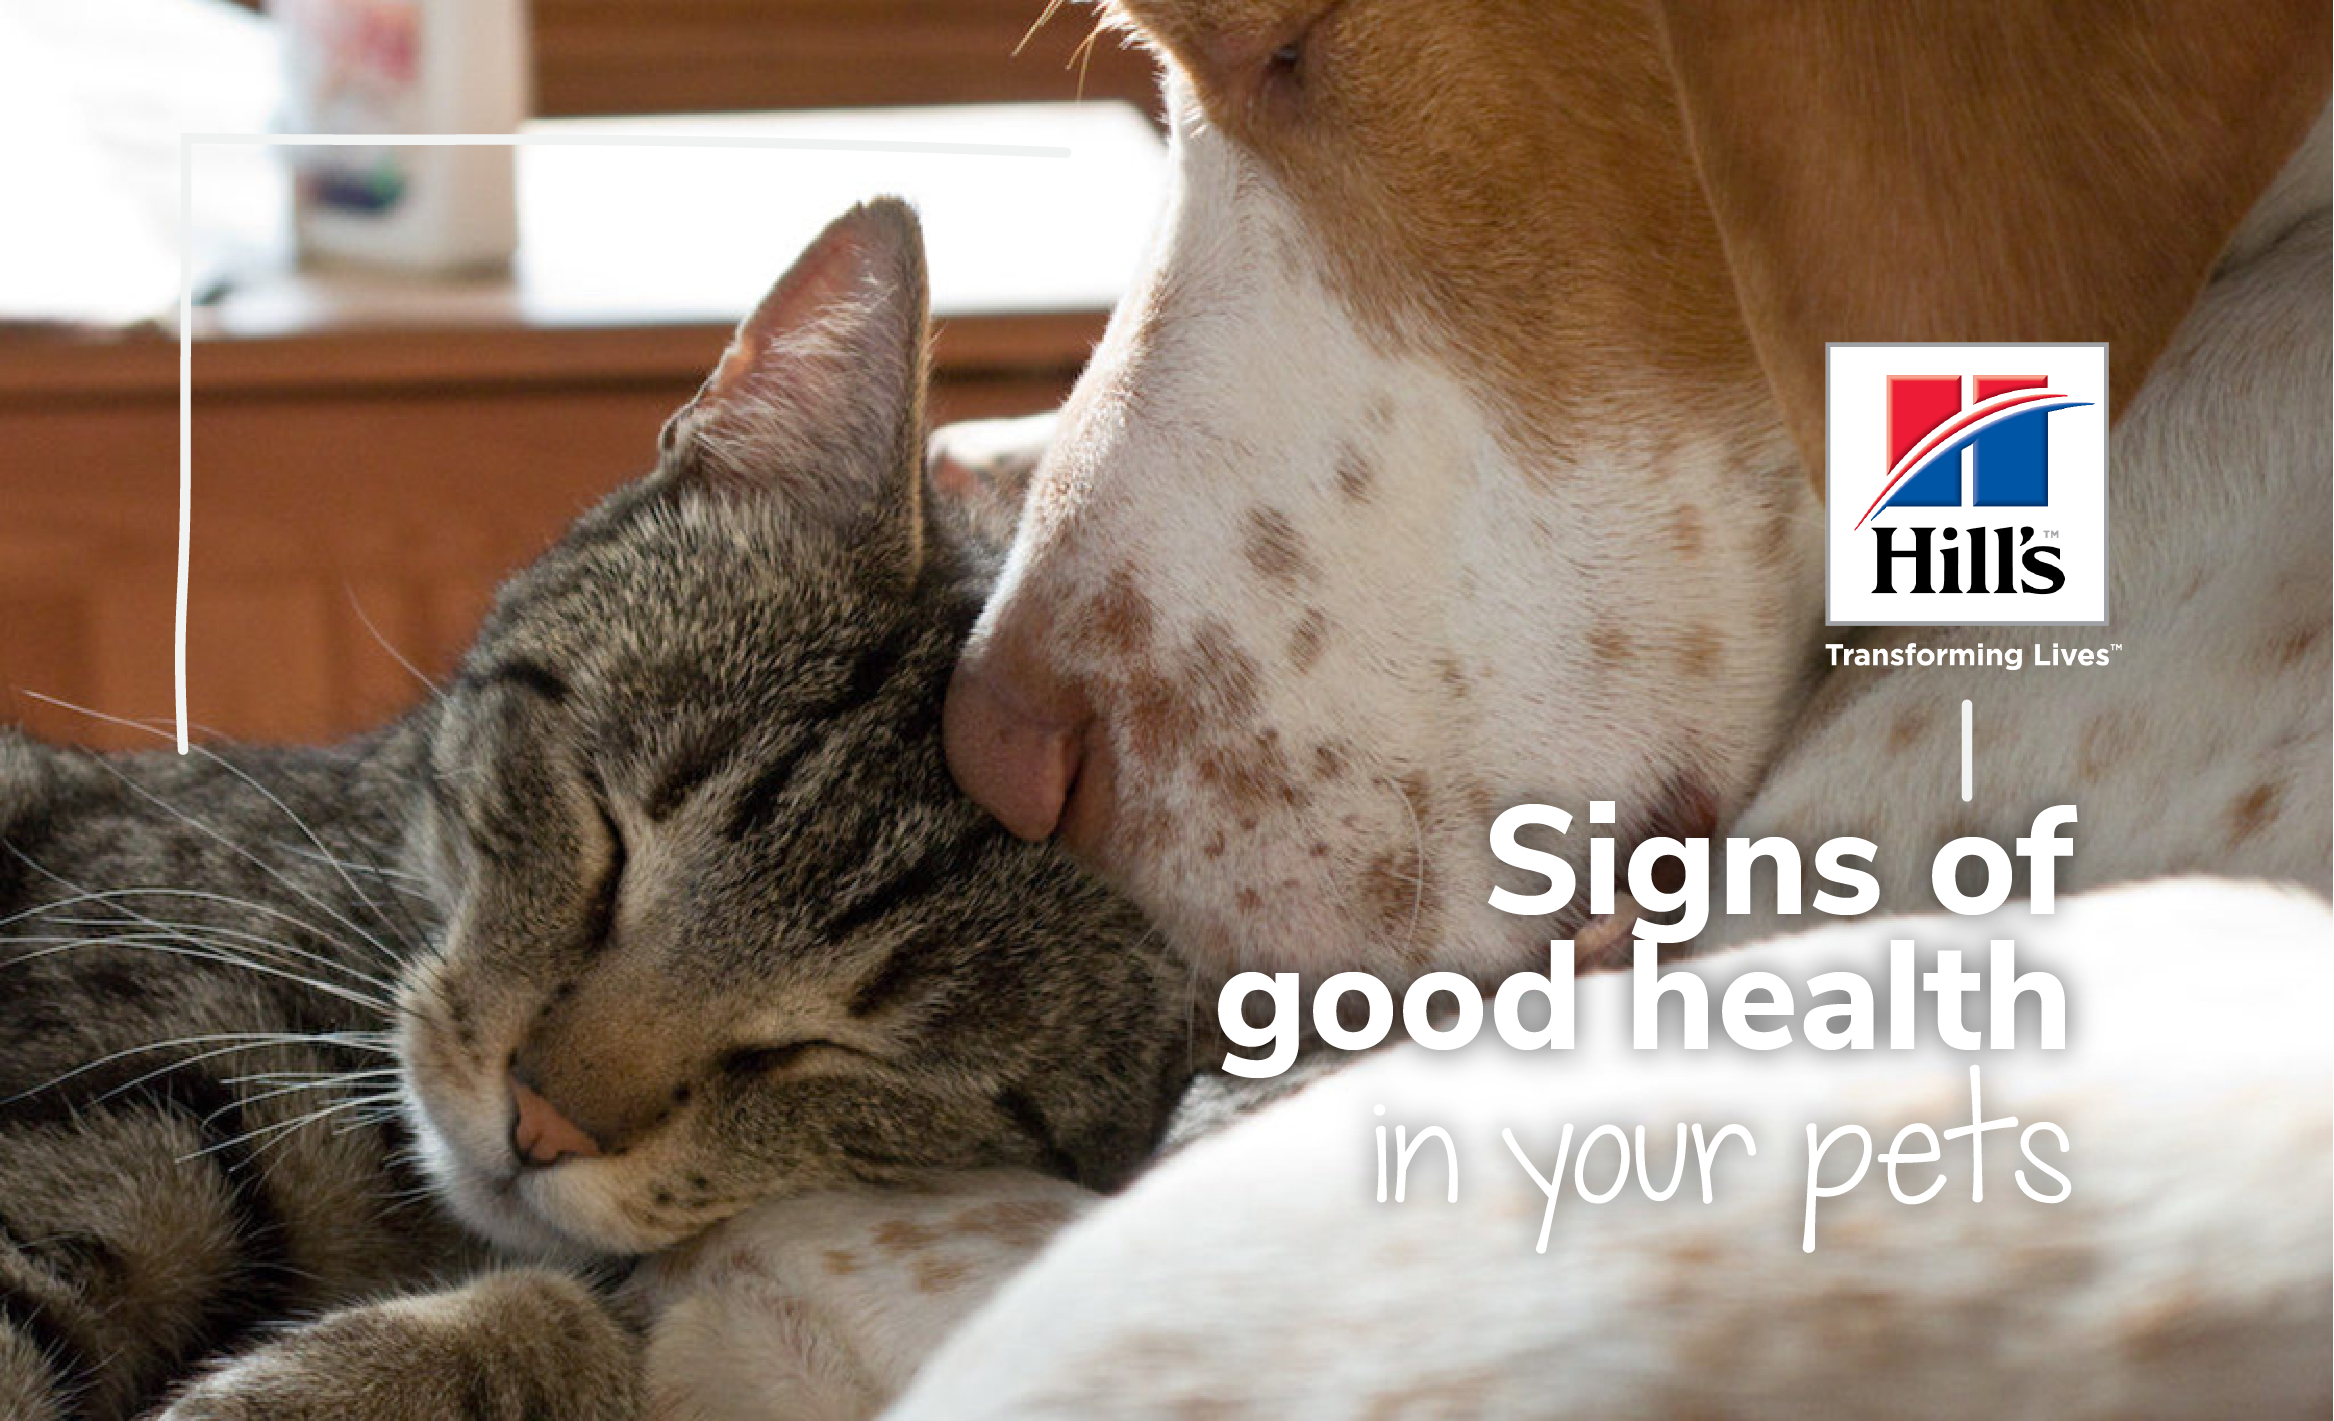 What Are The Signs Of Good Health And Nutrition In Your Pets?